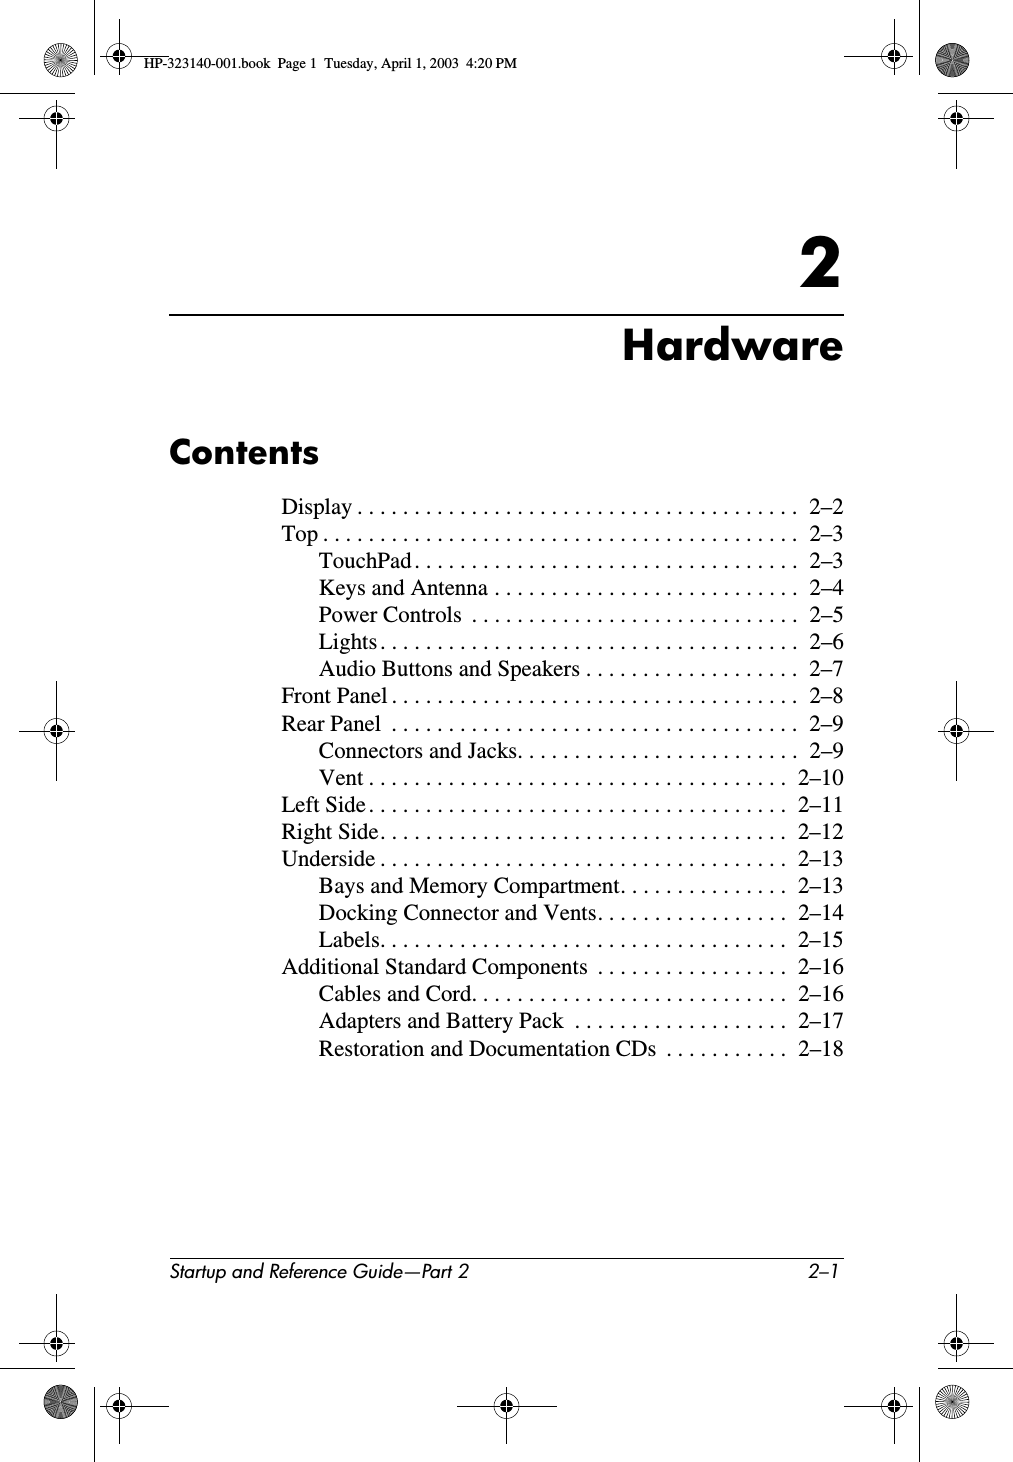 Startup and Reference Guide—Part 2 2–12HardwareContentsDisplay . . . . . . . . . . . . . . . . . . . . . . . . . . . . . . . . . . . . . . .  2–2Top . . . . . . . . . . . . . . . . . . . . . . . . . . . . . . . . . . . . . . . . . .  2–3TouchPad . . . . . . . . . . . . . . . . . . . . . . . . . . . . . . . . . .  2–3Keys and Antenna . . . . . . . . . . . . . . . . . . . . . . . . . . .  2–4Power Controls  . . . . . . . . . . . . . . . . . . . . . . . . . . . . .  2–5Lights . . . . . . . . . . . . . . . . . . . . . . . . . . . . . . . . . . . . .  2–6Audio Buttons and Speakers . . . . . . . . . . . . . . . . . . .  2–7Front Panel . . . . . . . . . . . . . . . . . . . . . . . . . . . . . . . . . . . .  2–8Rear Panel  . . . . . . . . . . . . . . . . . . . . . . . . . . . . . . . . . . . .  2–9Connectors and Jacks. . . . . . . . . . . . . . . . . . . . . . . . .  2–9Vent . . . . . . . . . . . . . . . . . . . . . . . . . . . . . . . . . . . . .  2–10Left Side. . . . . . . . . . . . . . . . . . . . . . . . . . . . . . . . . . . . .  2–11Right Side. . . . . . . . . . . . . . . . . . . . . . . . . . . . . . . . . . . .  2–12Underside . . . . . . . . . . . . . . . . . . . . . . . . . . . . . . . . . . . .  2–13Bays and Memory Compartment. . . . . . . . . . . . . . .  2–13Docking Connector and Vents. . . . . . . . . . . . . . . . .  2–14Labels. . . . . . . . . . . . . . . . . . . . . . . . . . . . . . . . . . . .  2–15Additional Standard Components  . . . . . . . . . . . . . . . . .  2–16Cables and Cord. . . . . . . . . . . . . . . . . . . . . . . . . . . .  2–16Adapters and Battery Pack  . . . . . . . . . . . . . . . . . . .  2–17Restoration and Documentation CDs  . . . . . . . . . . .  2–18HP-323140-001.book  Page 1  Tuesday, April 1, 2003  4:20 PM